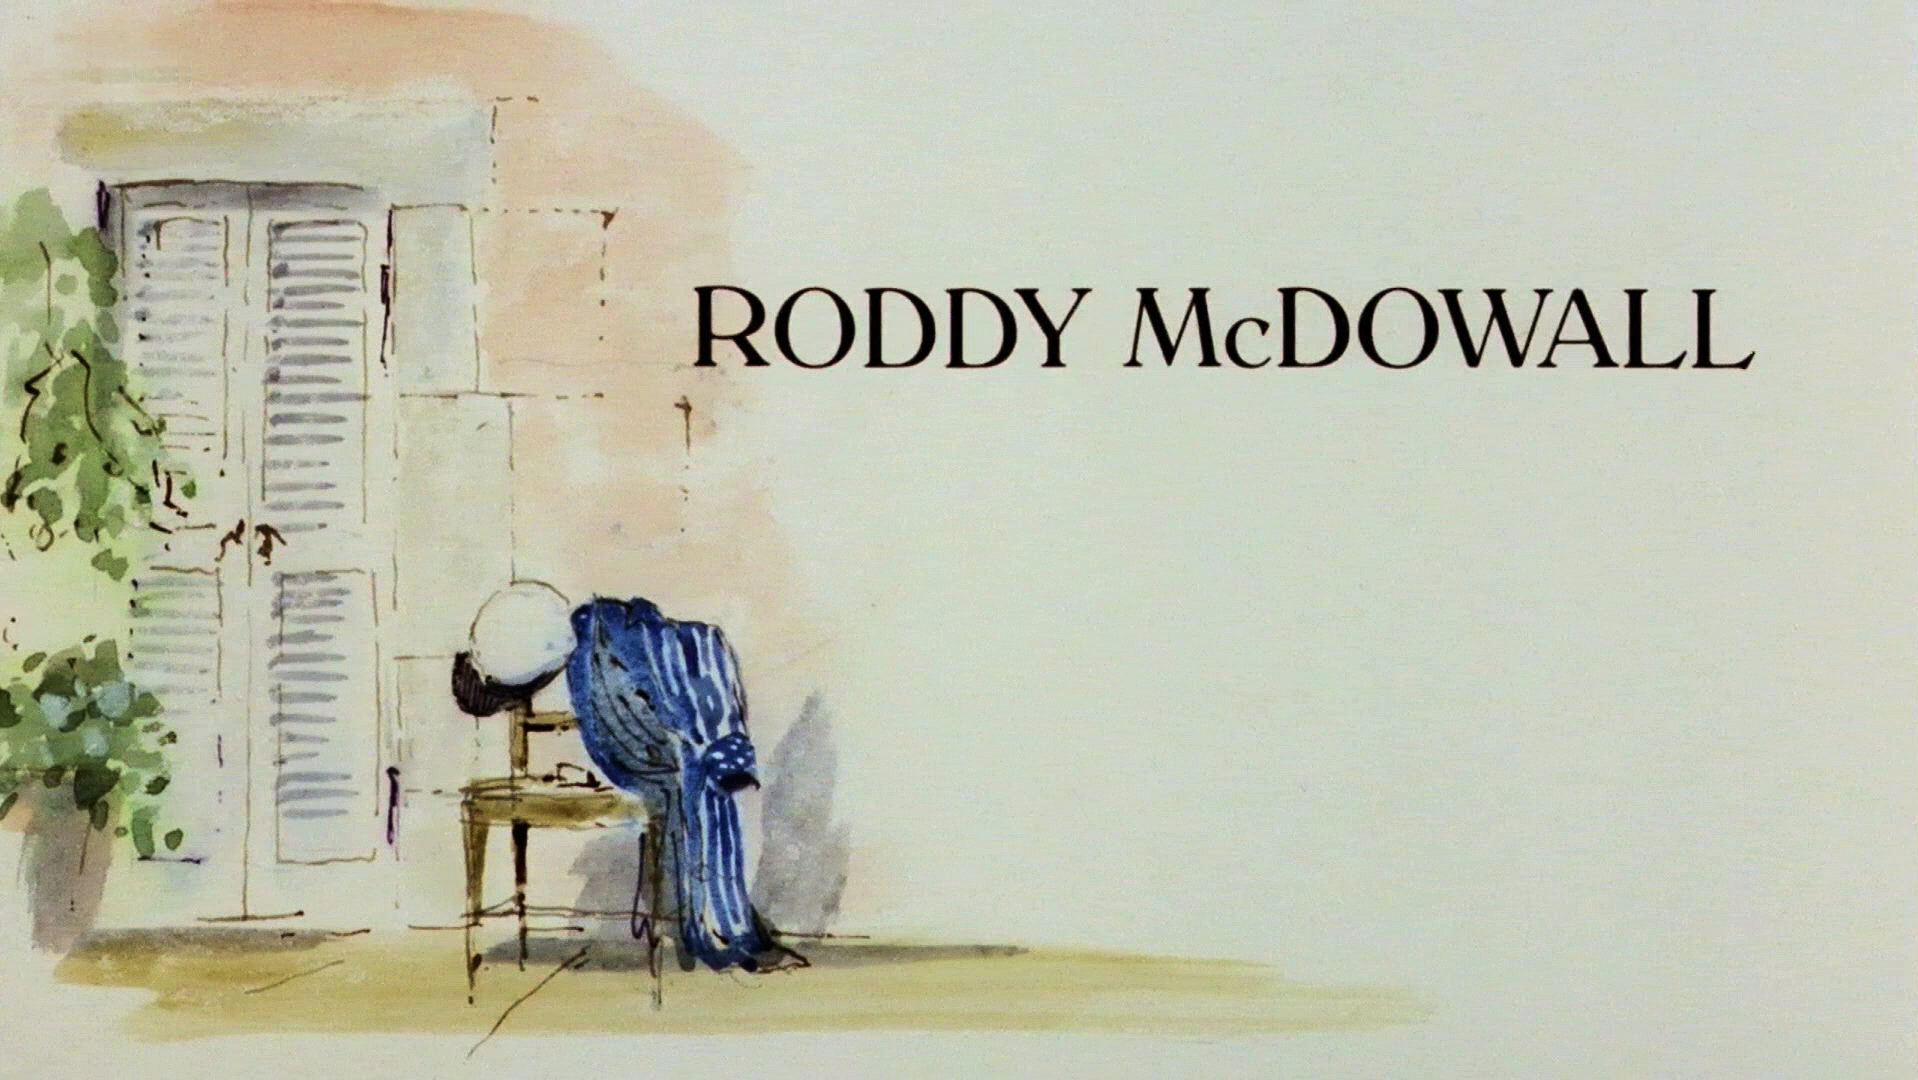 Main title from Evil Under the Sun (1982) (7). Roddy McDowall